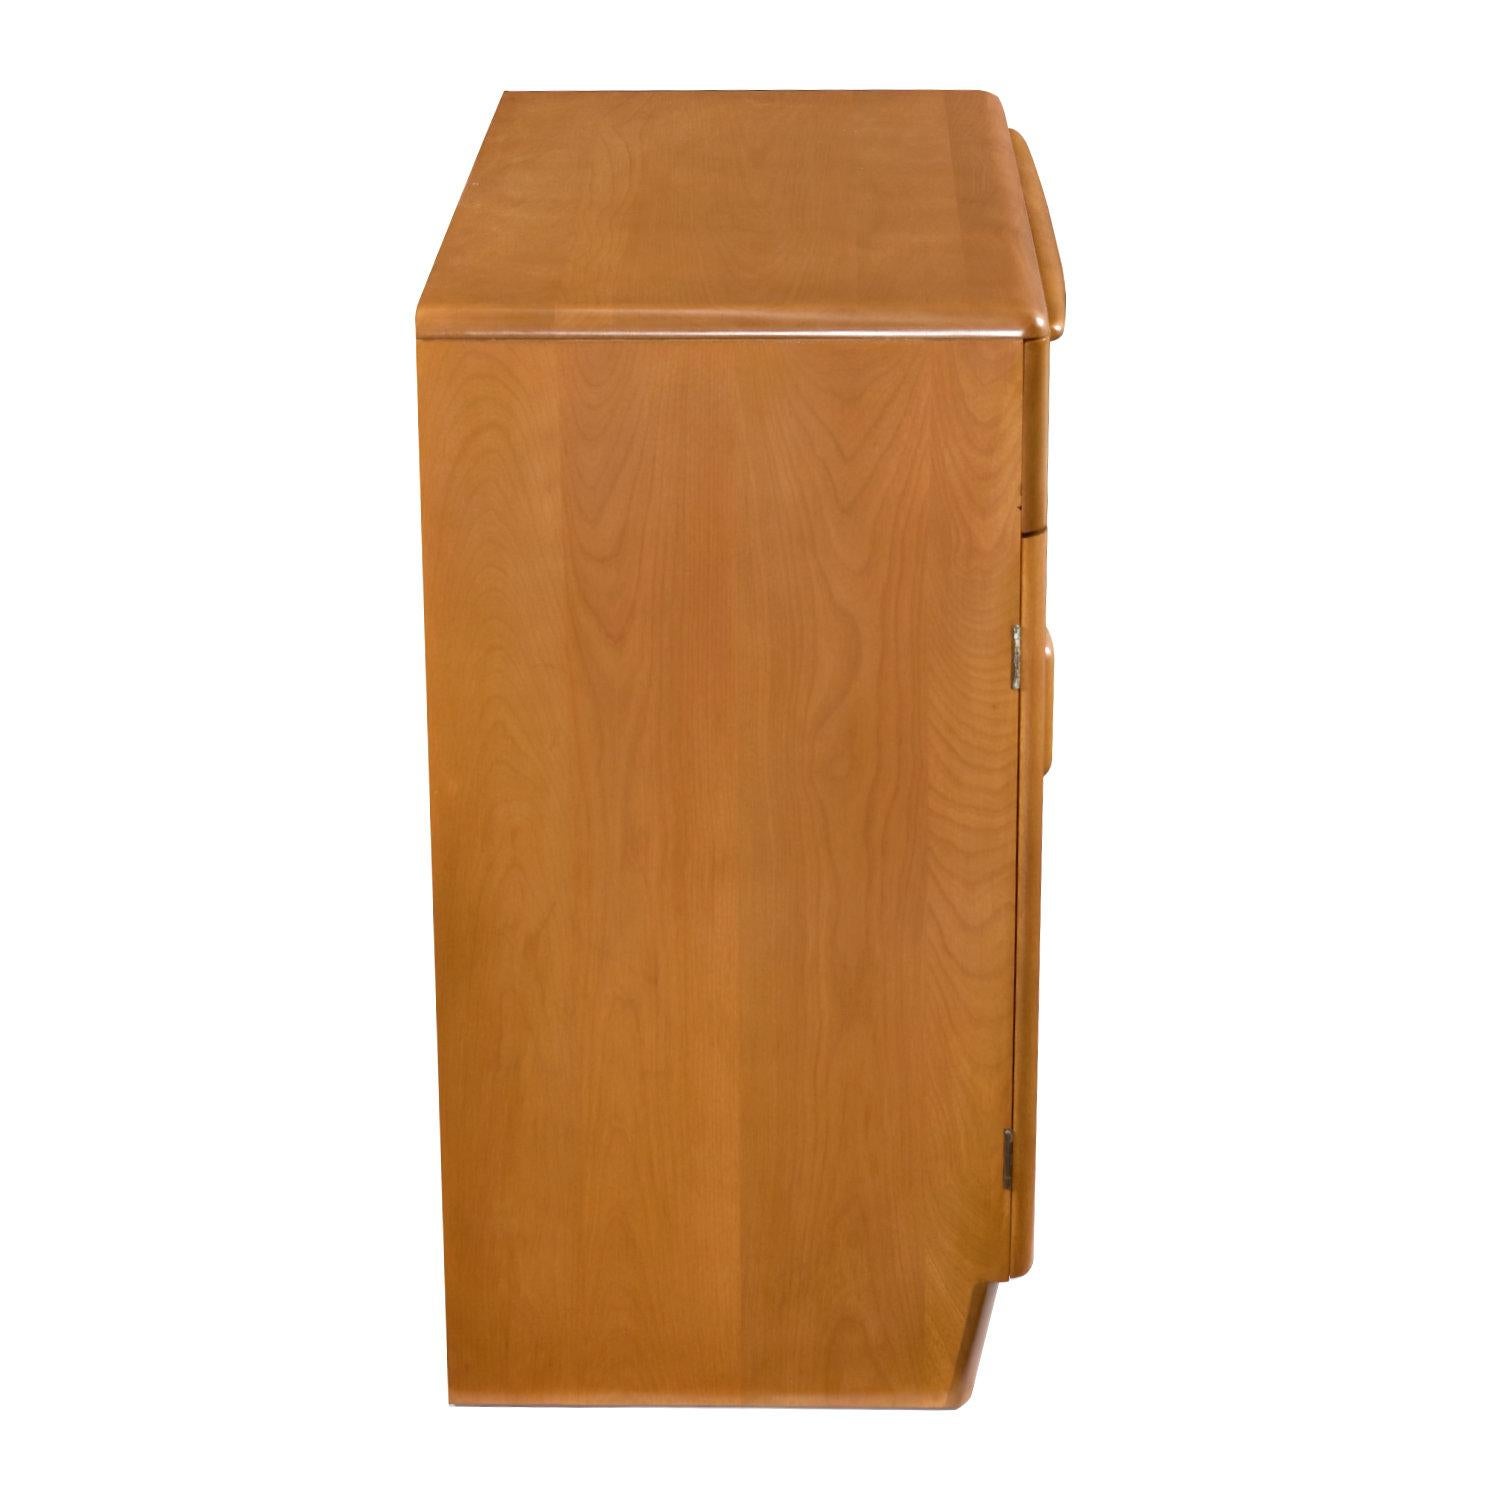 Restored Heywood Wakefield Mid-Century Modern M590 Server or Record Cabinet For Sale 2